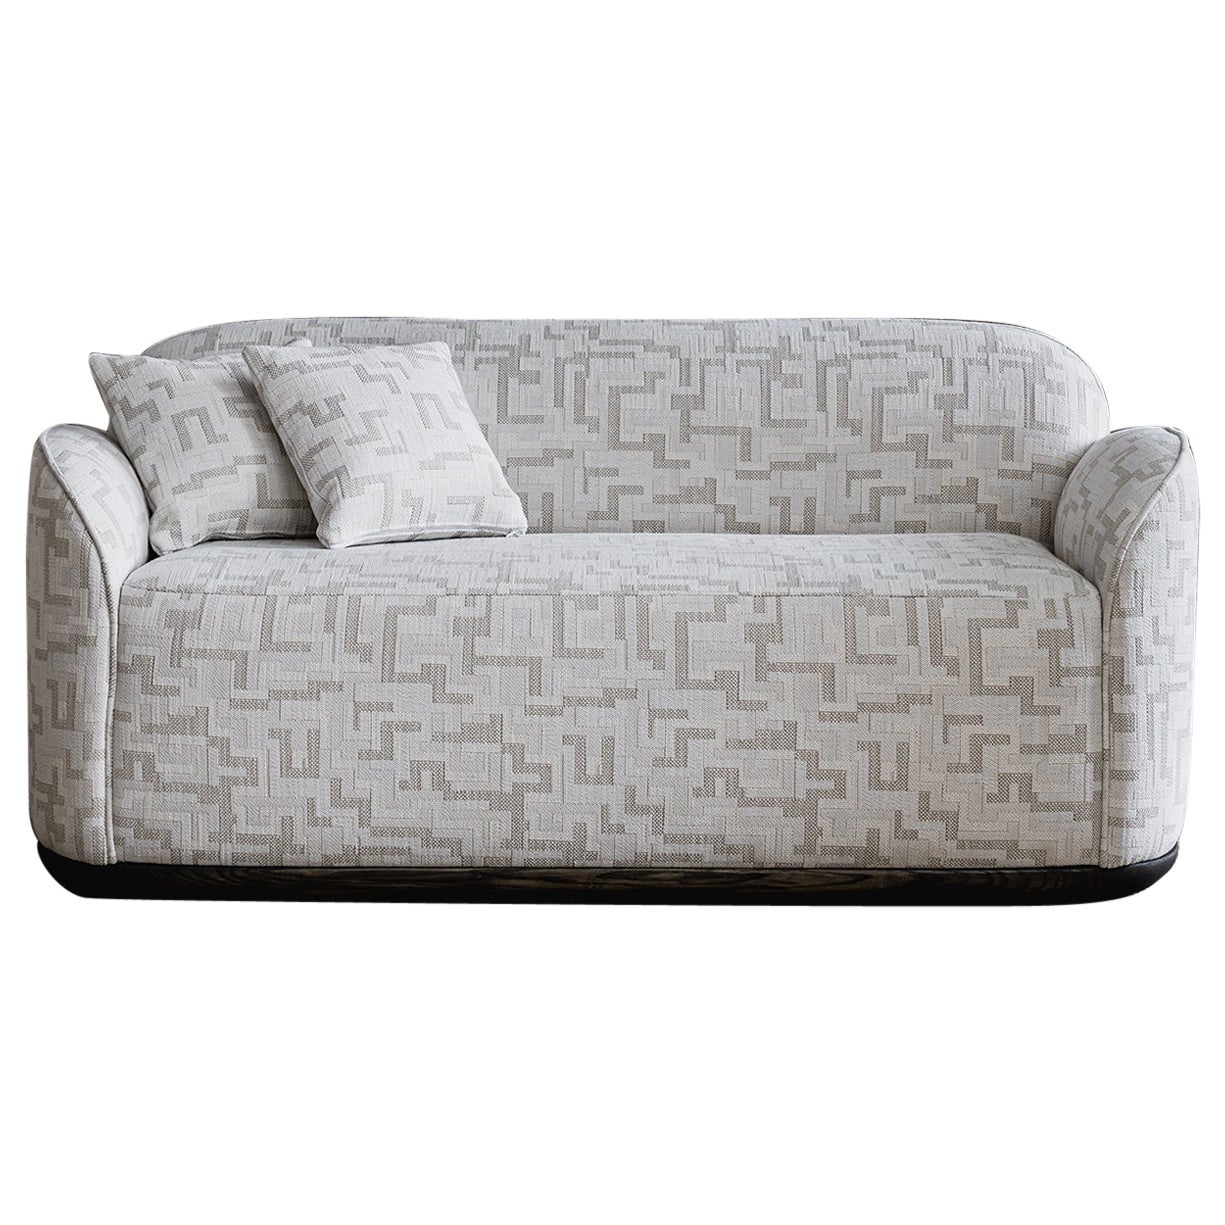 Contemporary Loveseat 'Unio' by Poiat, 01 Eneide Fabric by Dedar For Sale